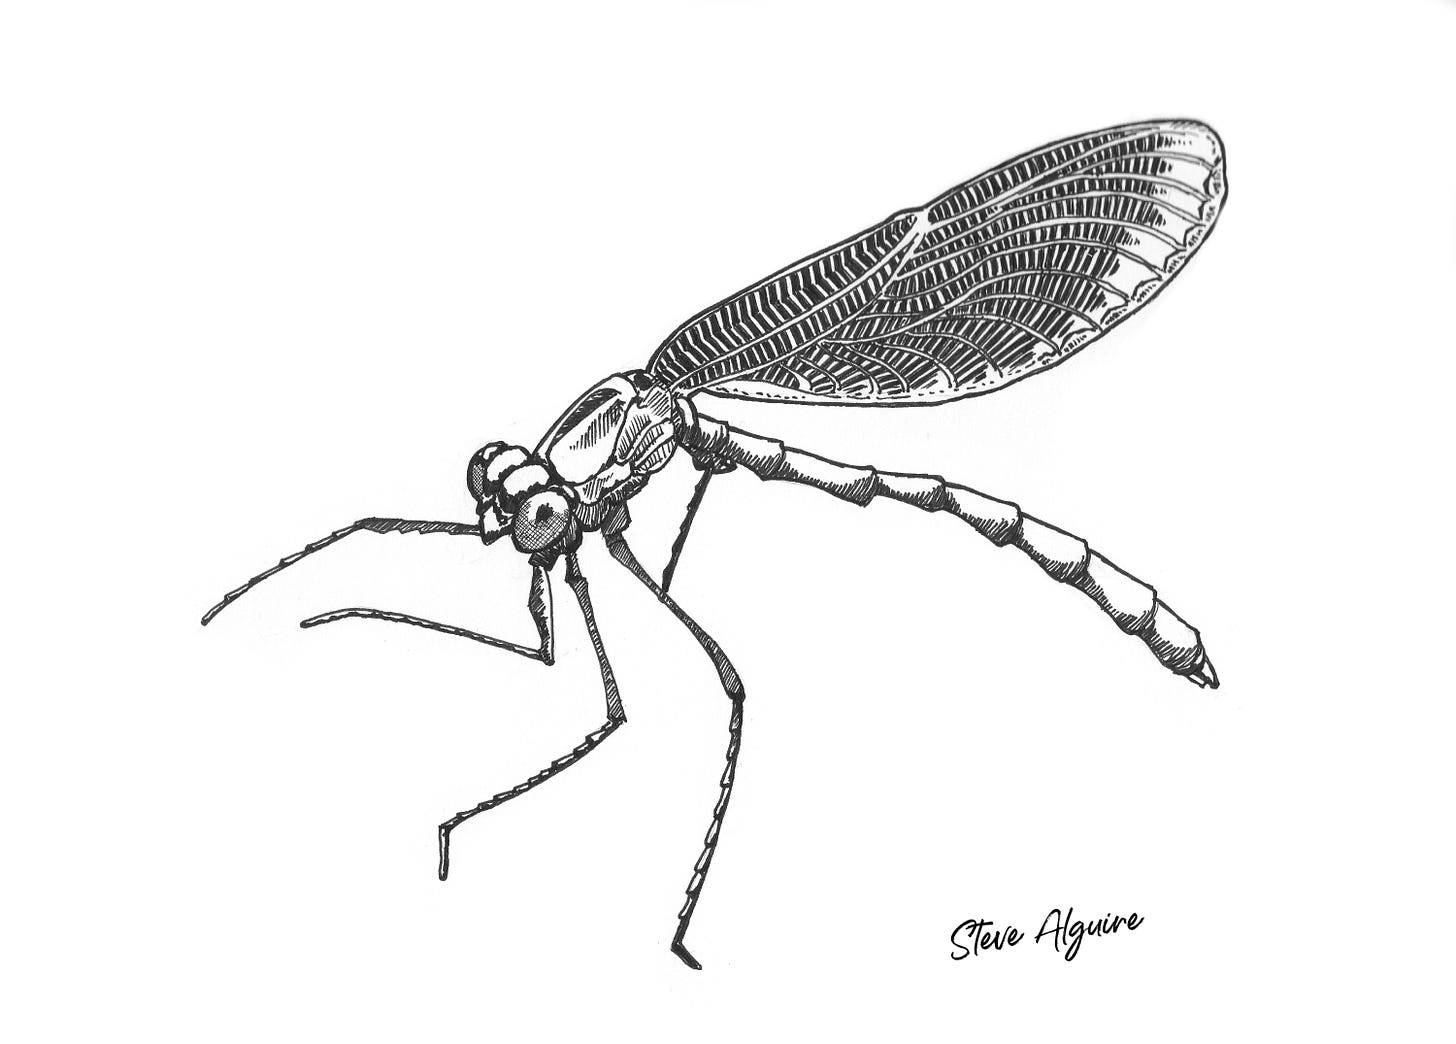 An ink drawing of a damselfly, a thin-bodied insect with large wings folded up over their back.